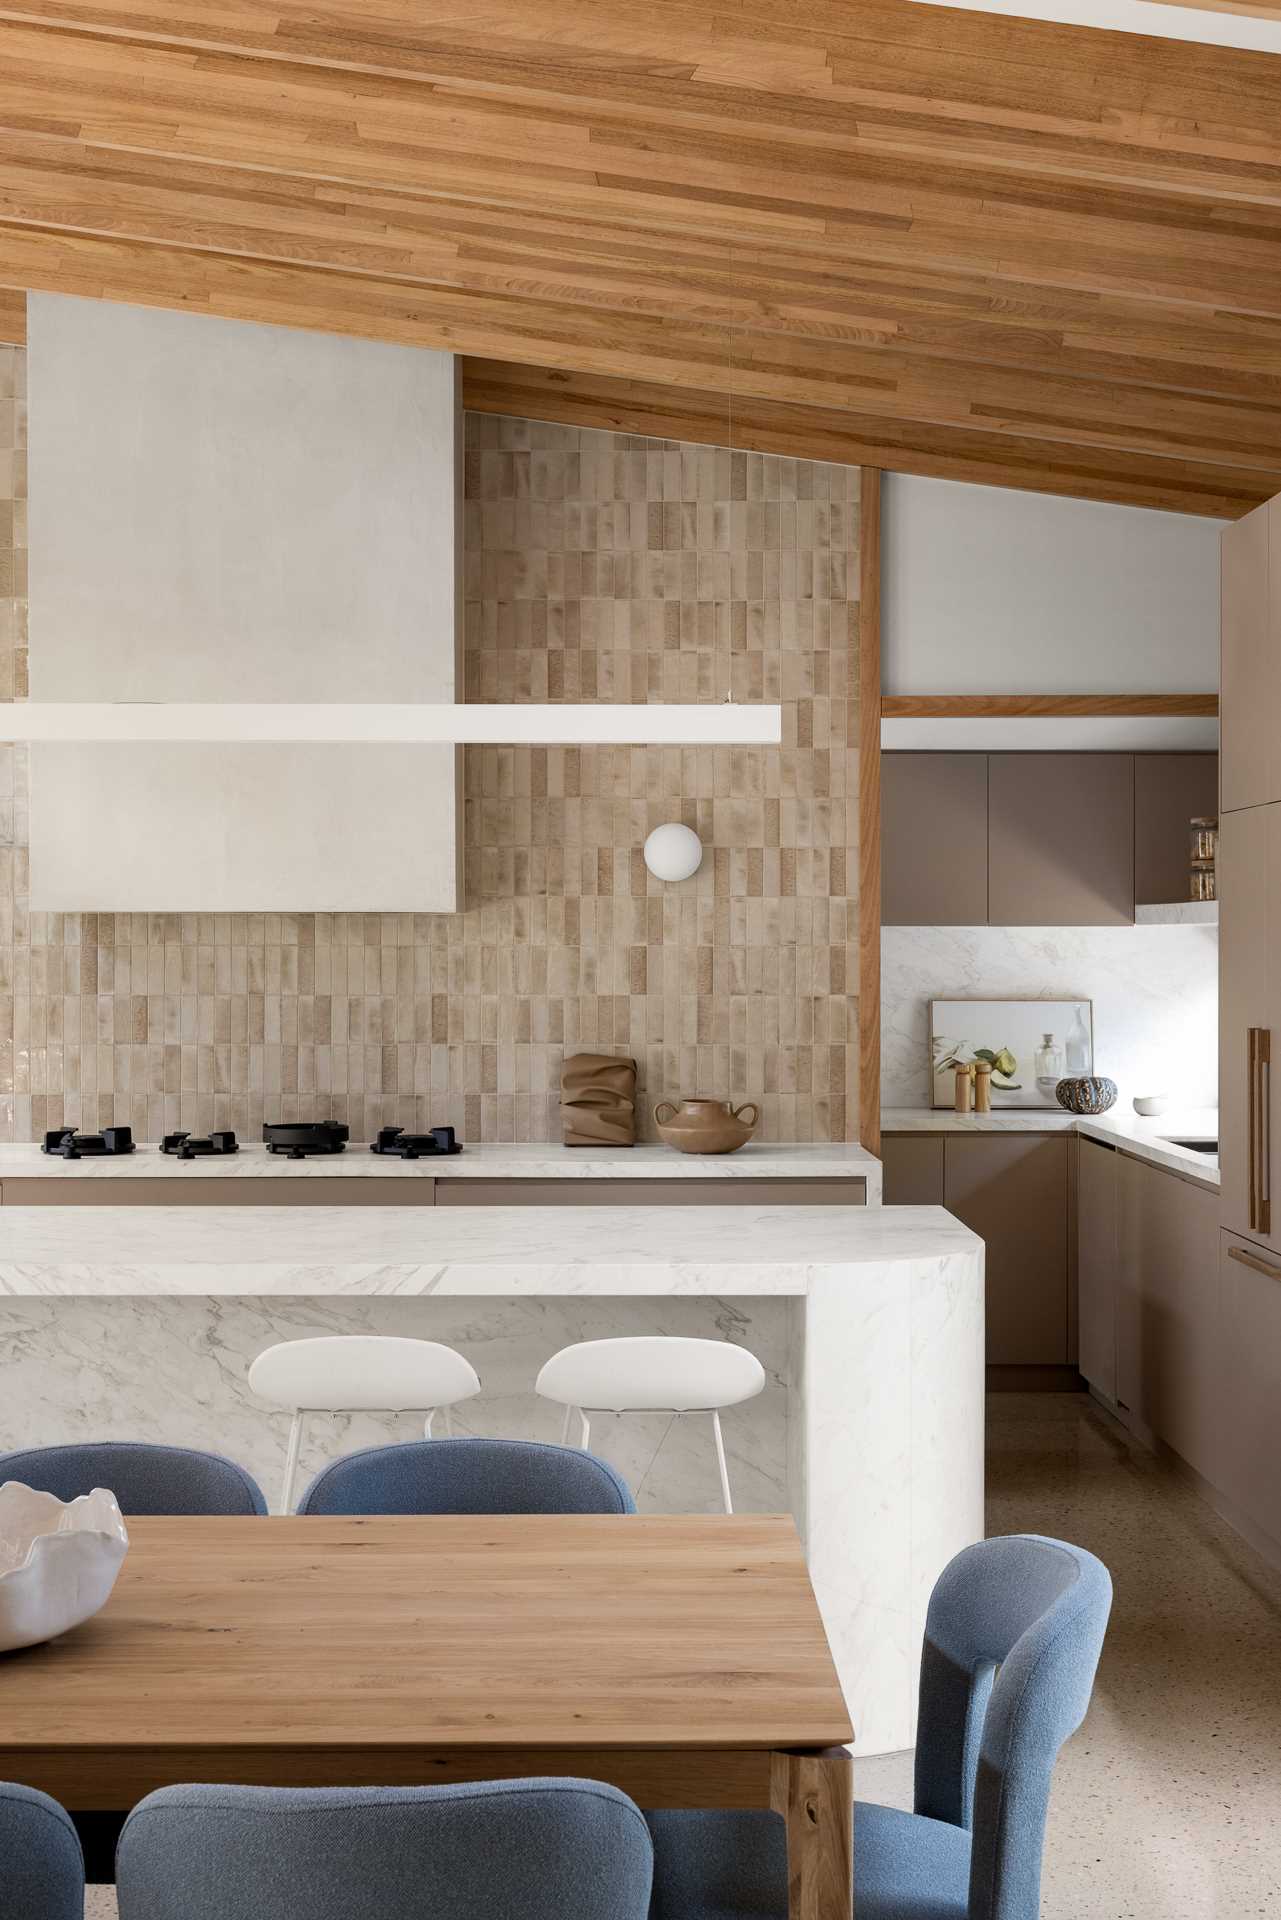 The kitchen has a neutral palette and an island, while tucked behind it is a walk-through laundry and pantry.